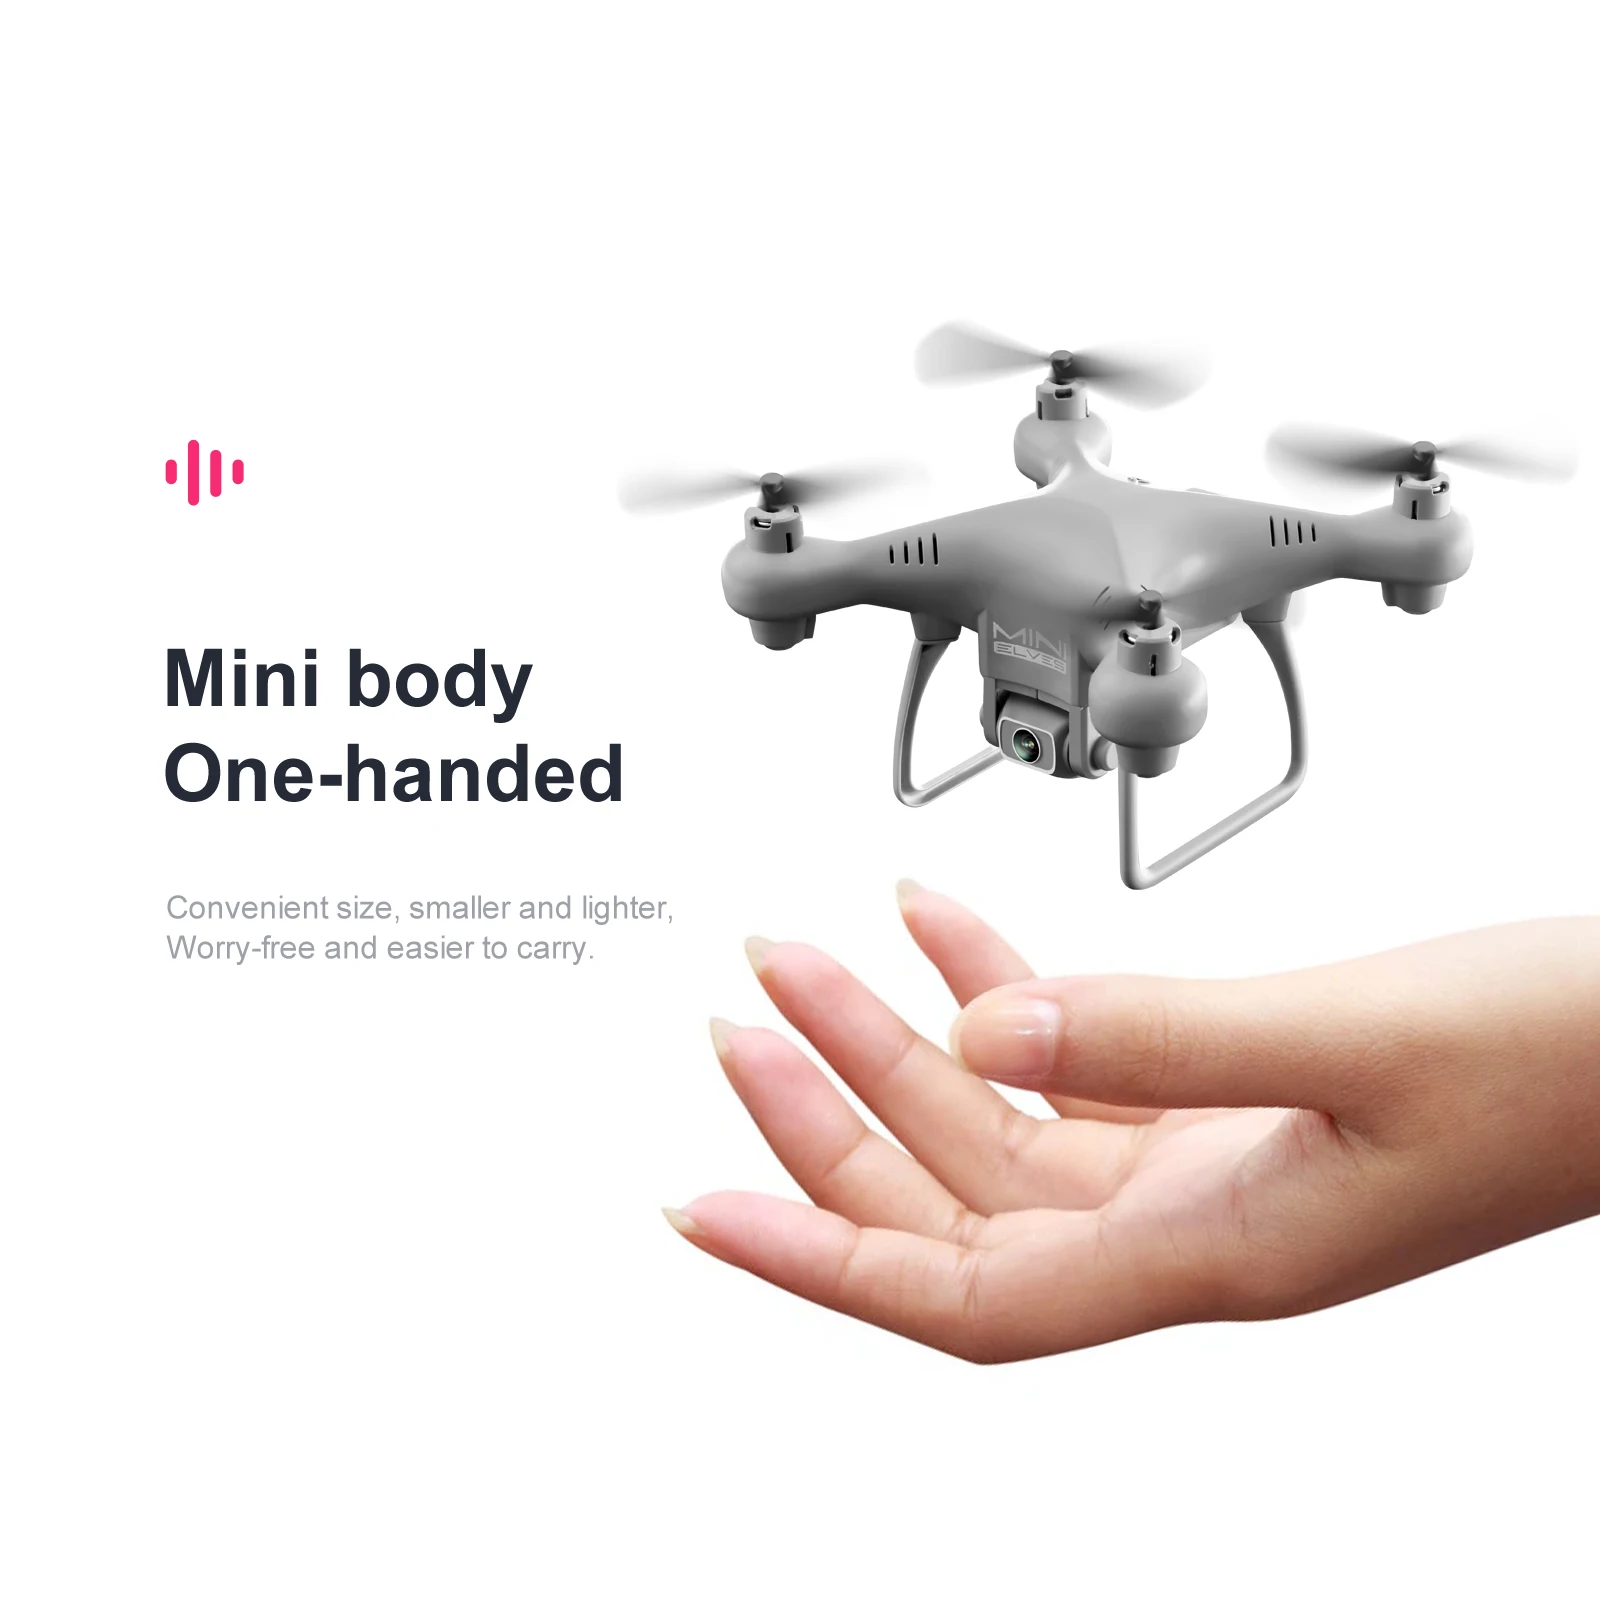 KY908 Mini Drone, mini body one-handed convenient size , smaller and lighter; worry